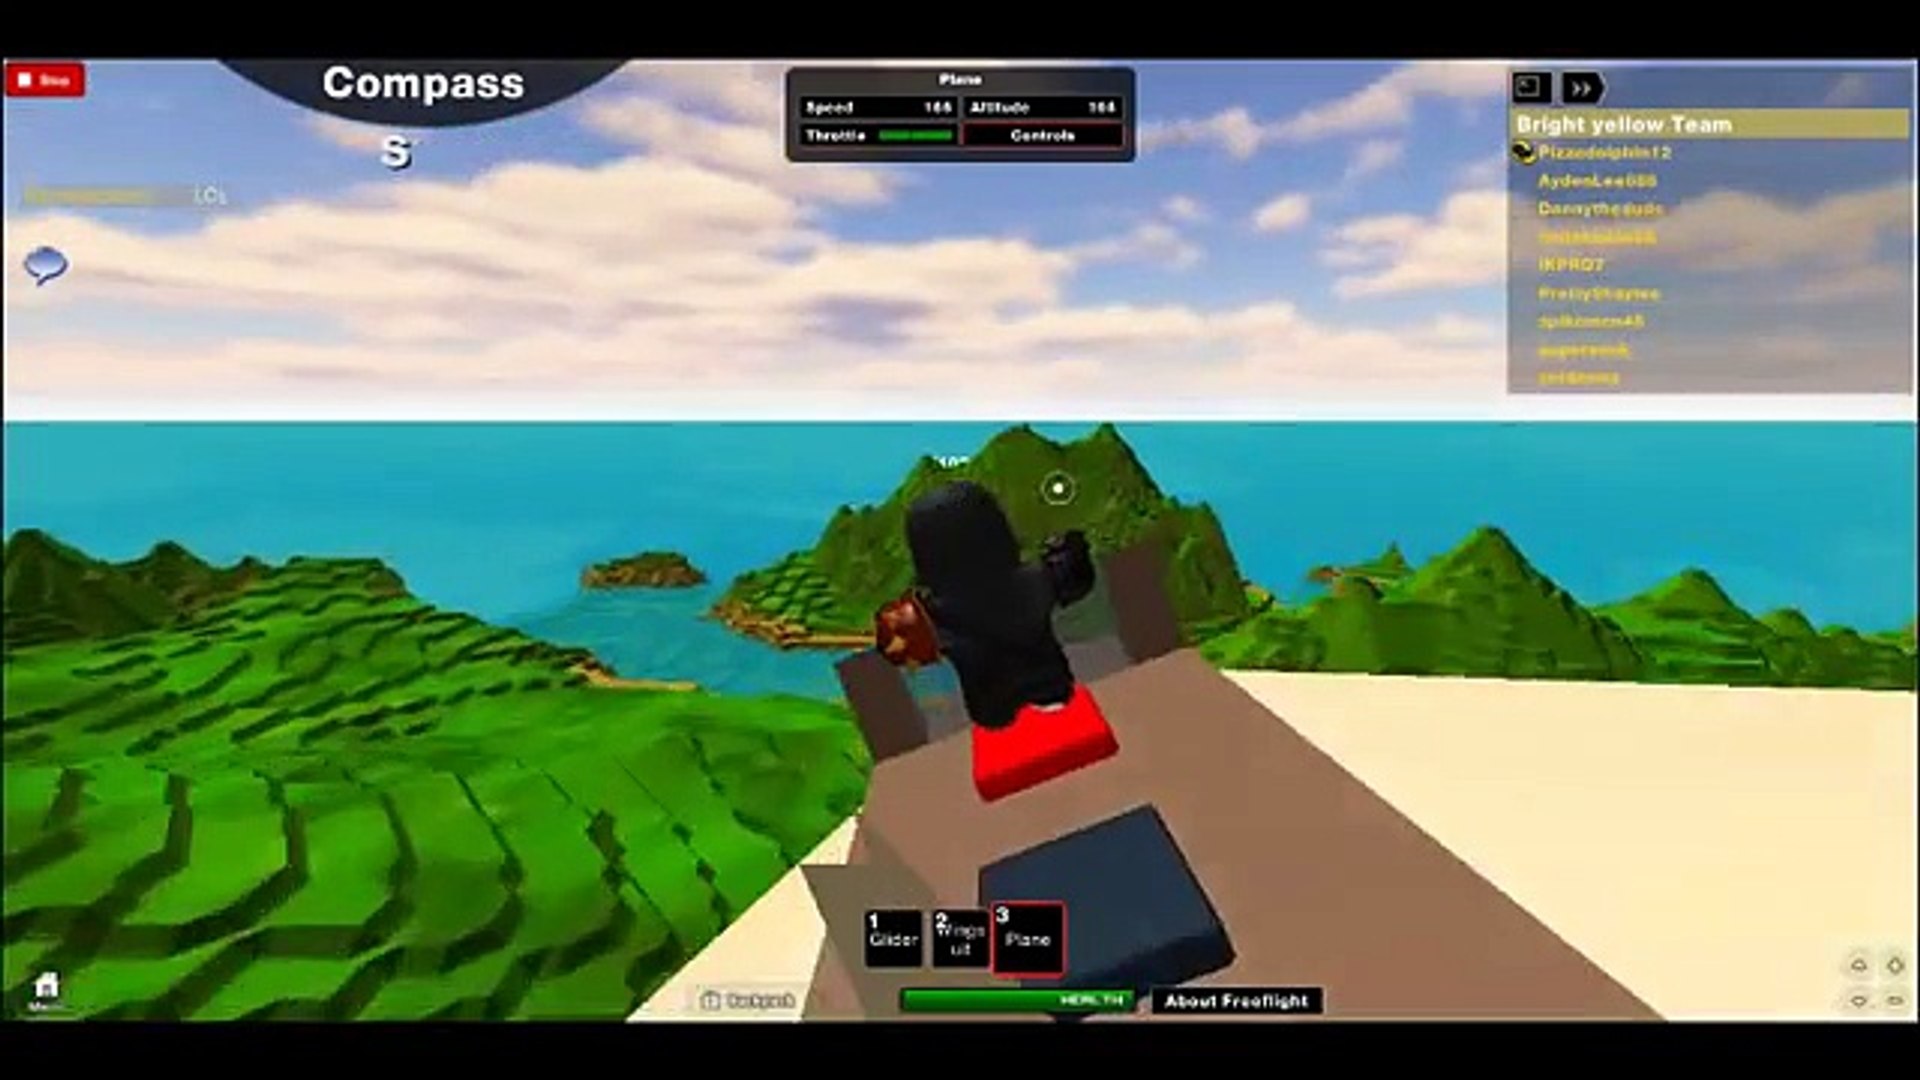 Pizzadolphin12 S Roblox Video With Fredlight Suicide Bombing